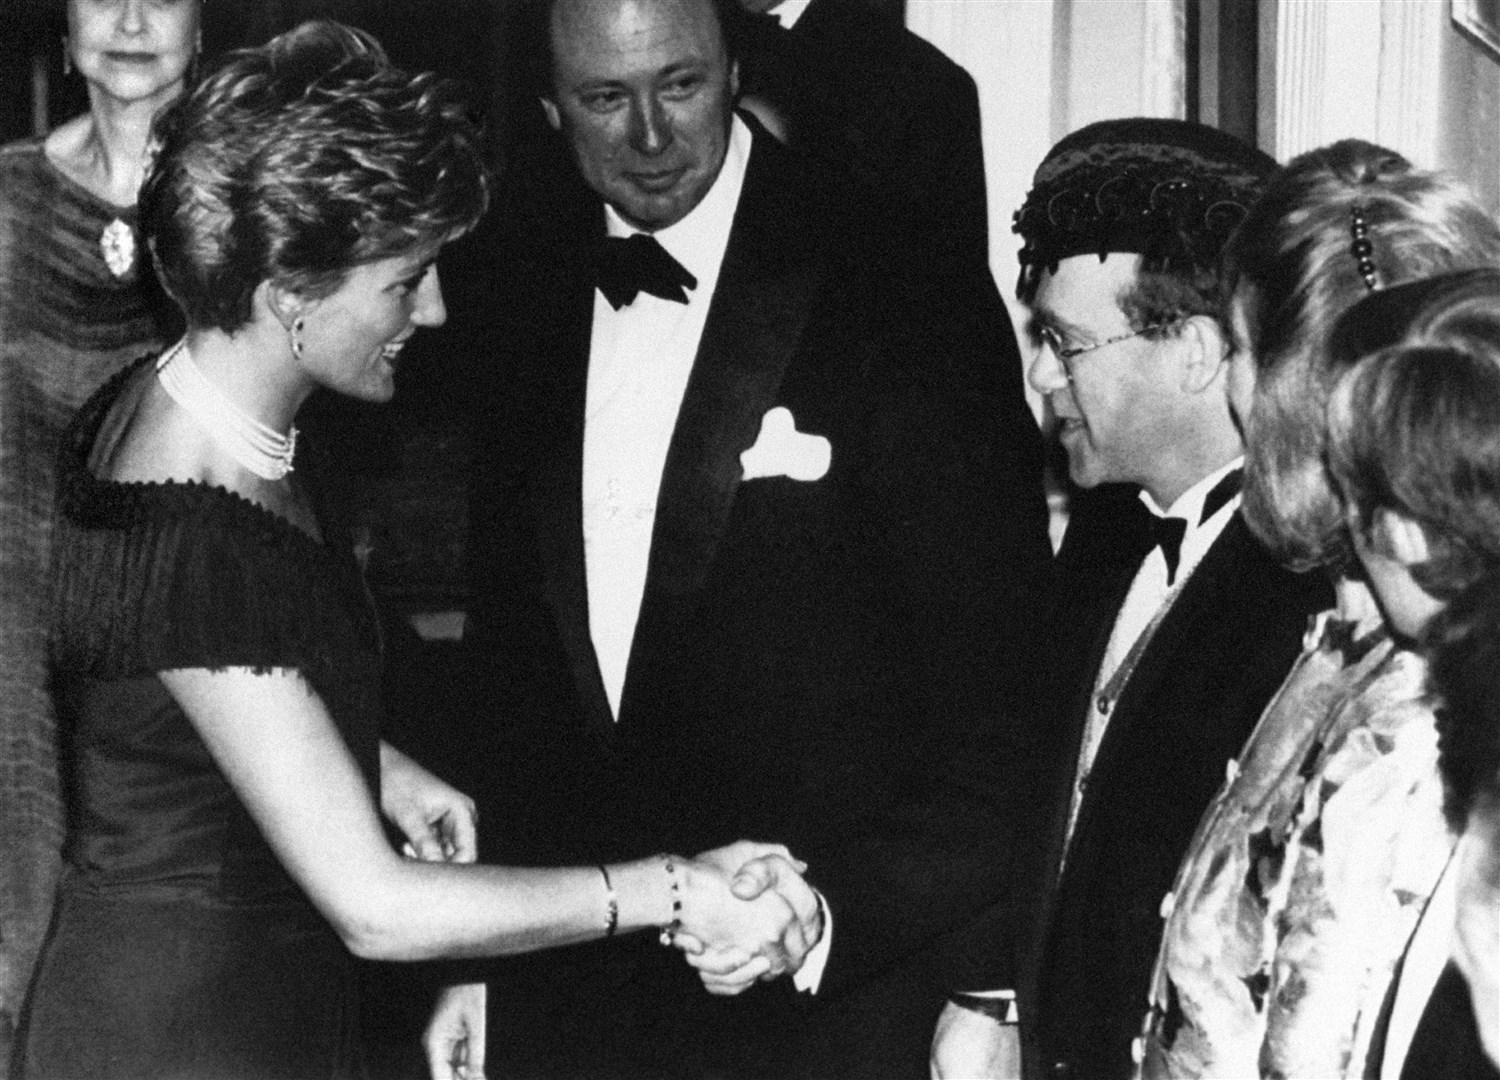 The Princess of Wales shakes hands with Elton John at the charity premiere of the musical Tango Argentino in London in 1991 (PA)